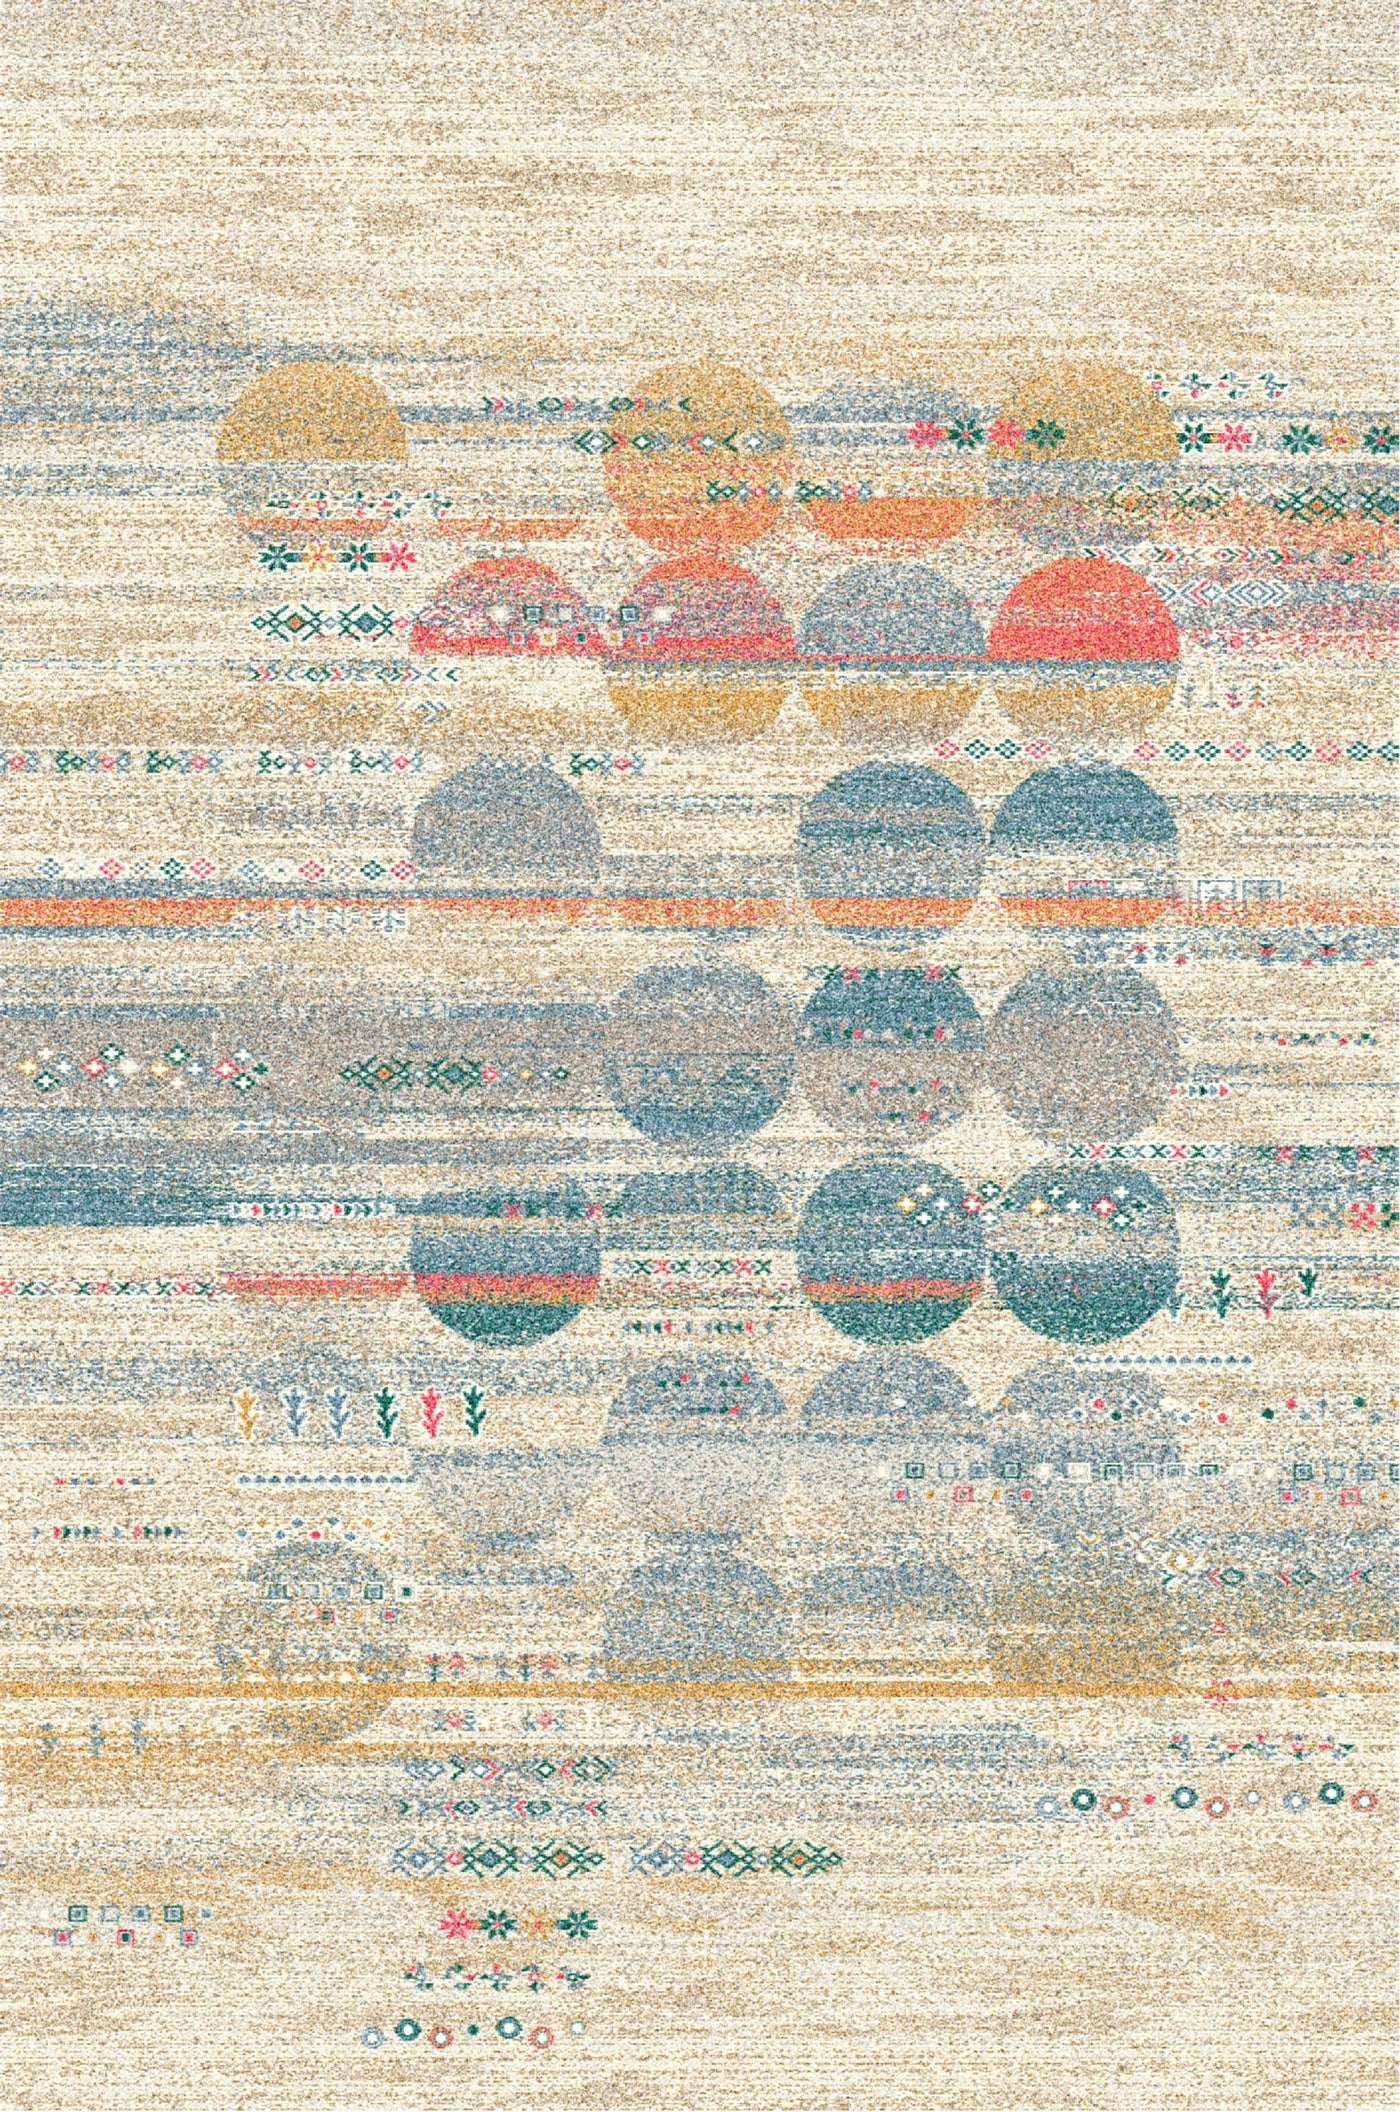 Rug with abstract circular patterns in muted colors and intricate horizontal stripes